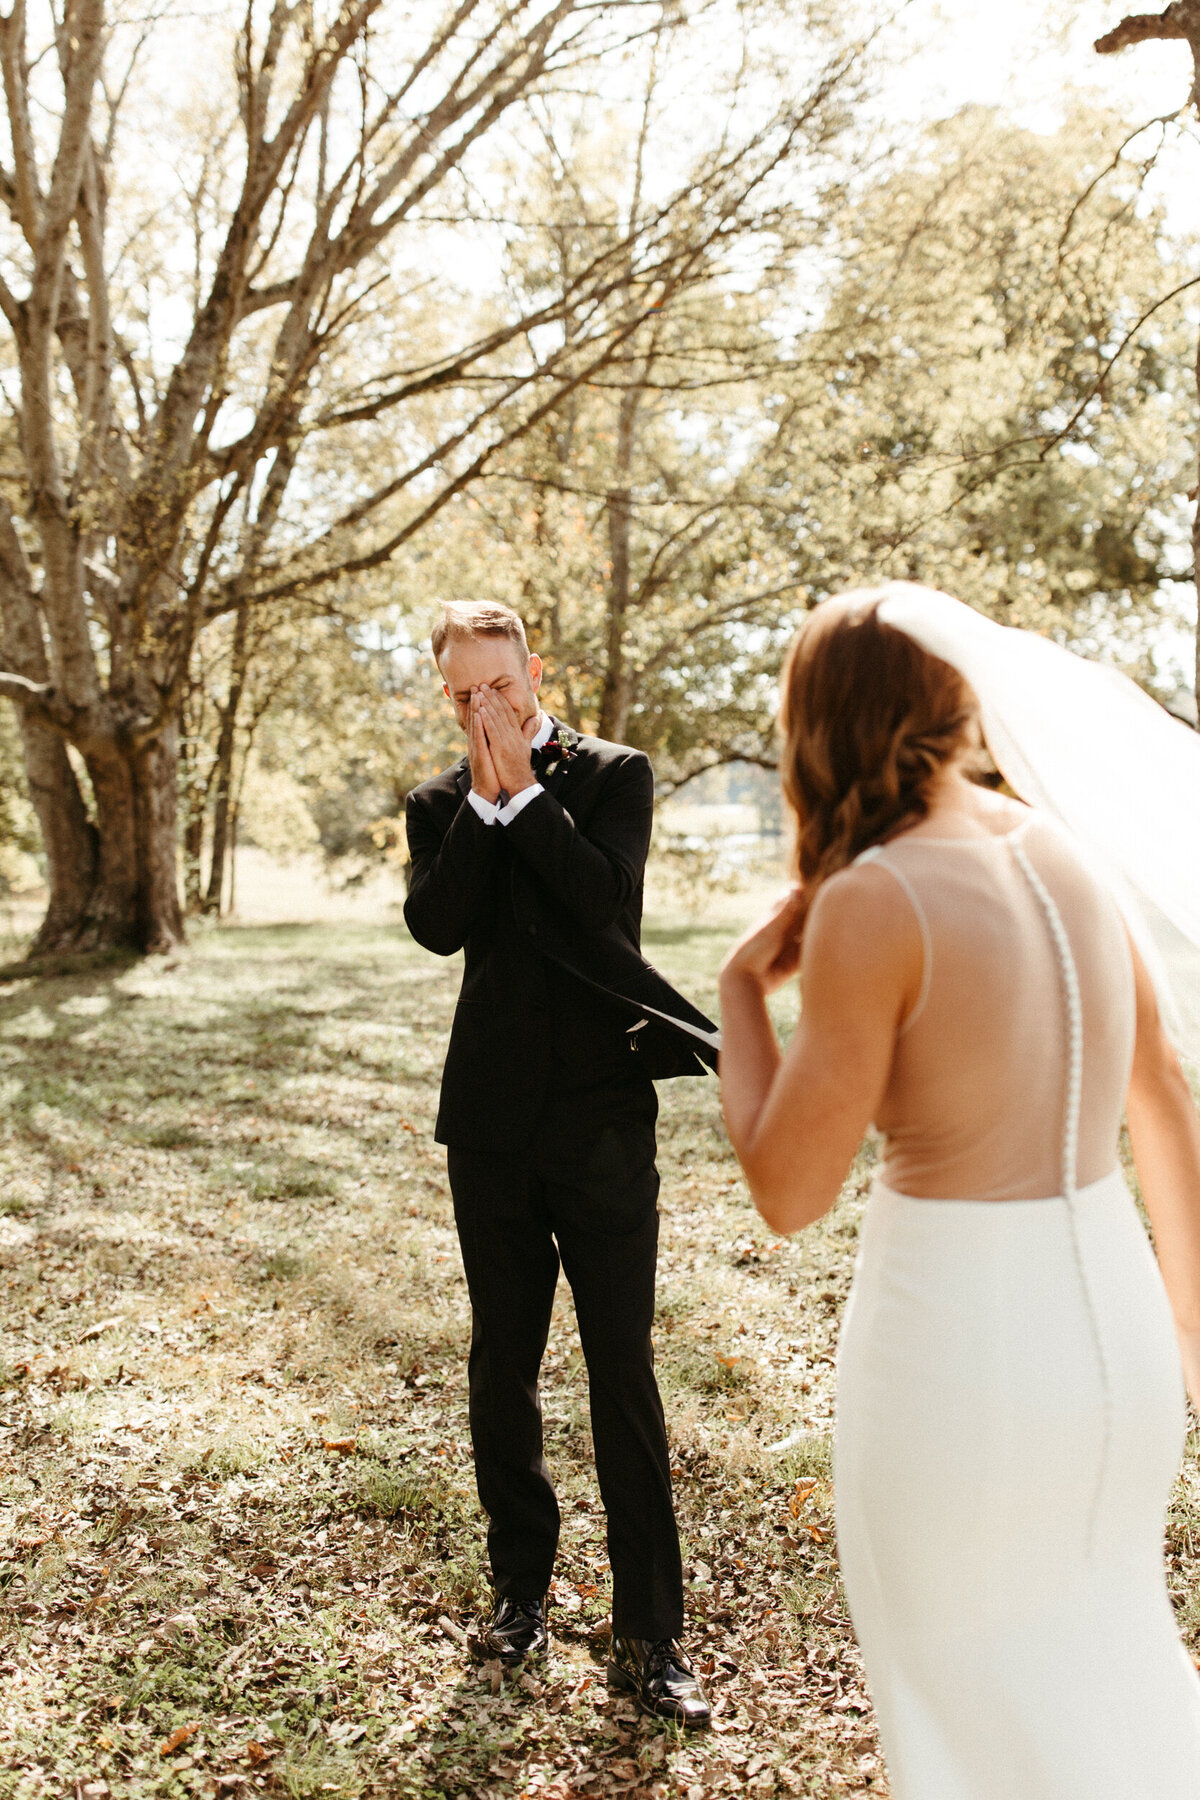 Groom getting emotional and crying during the first look with his bride